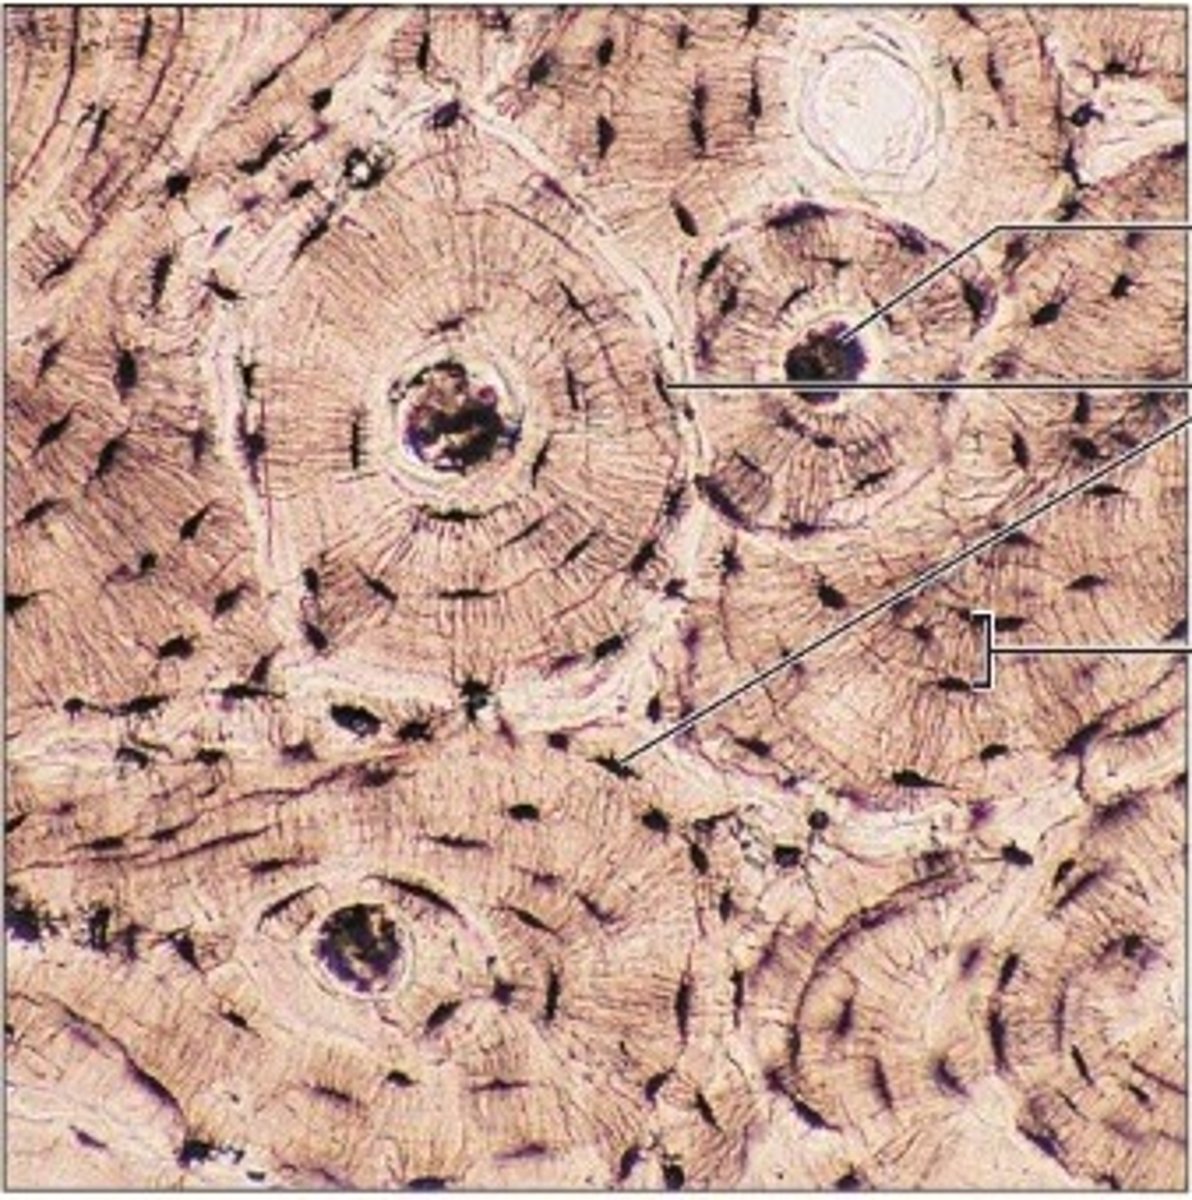 <p>- hard calcified matrix with alot of collagen fibres</p><p>- osteocytes lie in lacunae</p><p>- very well vascularized</p>